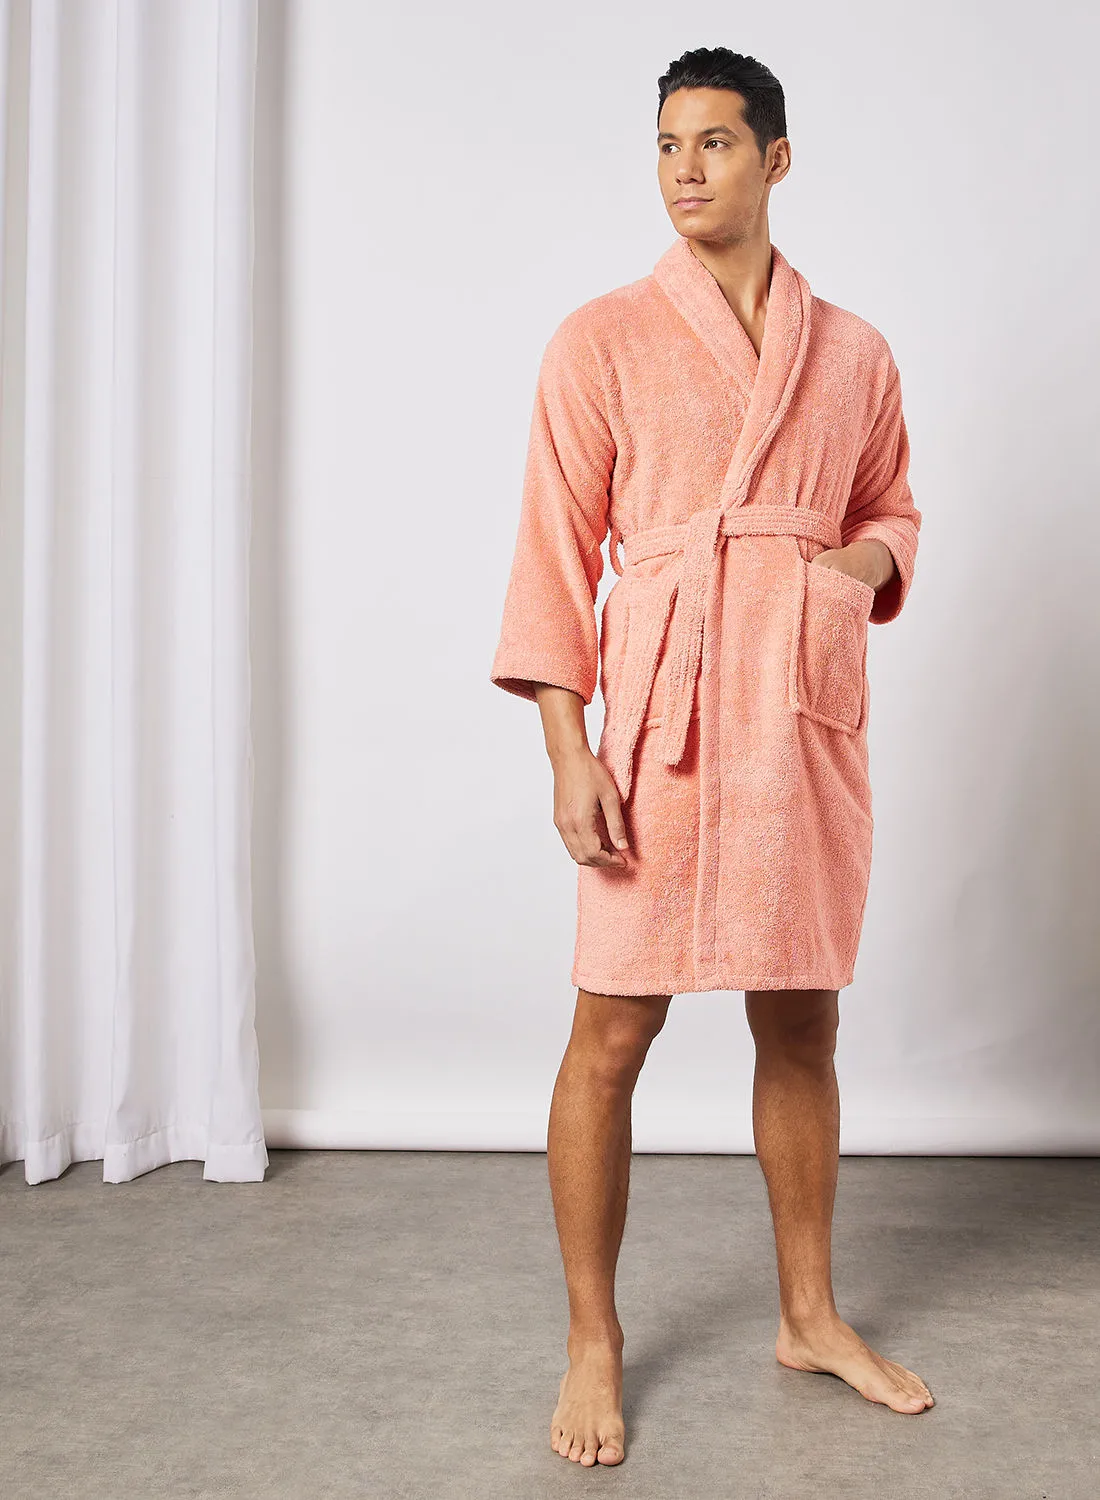 noon east Bathrobe - 400 GSM 100% Cotton Terry Silky Soft Spa Quality Comfort - Shawl Collar & Pocket - Coral Color - 1 Piece